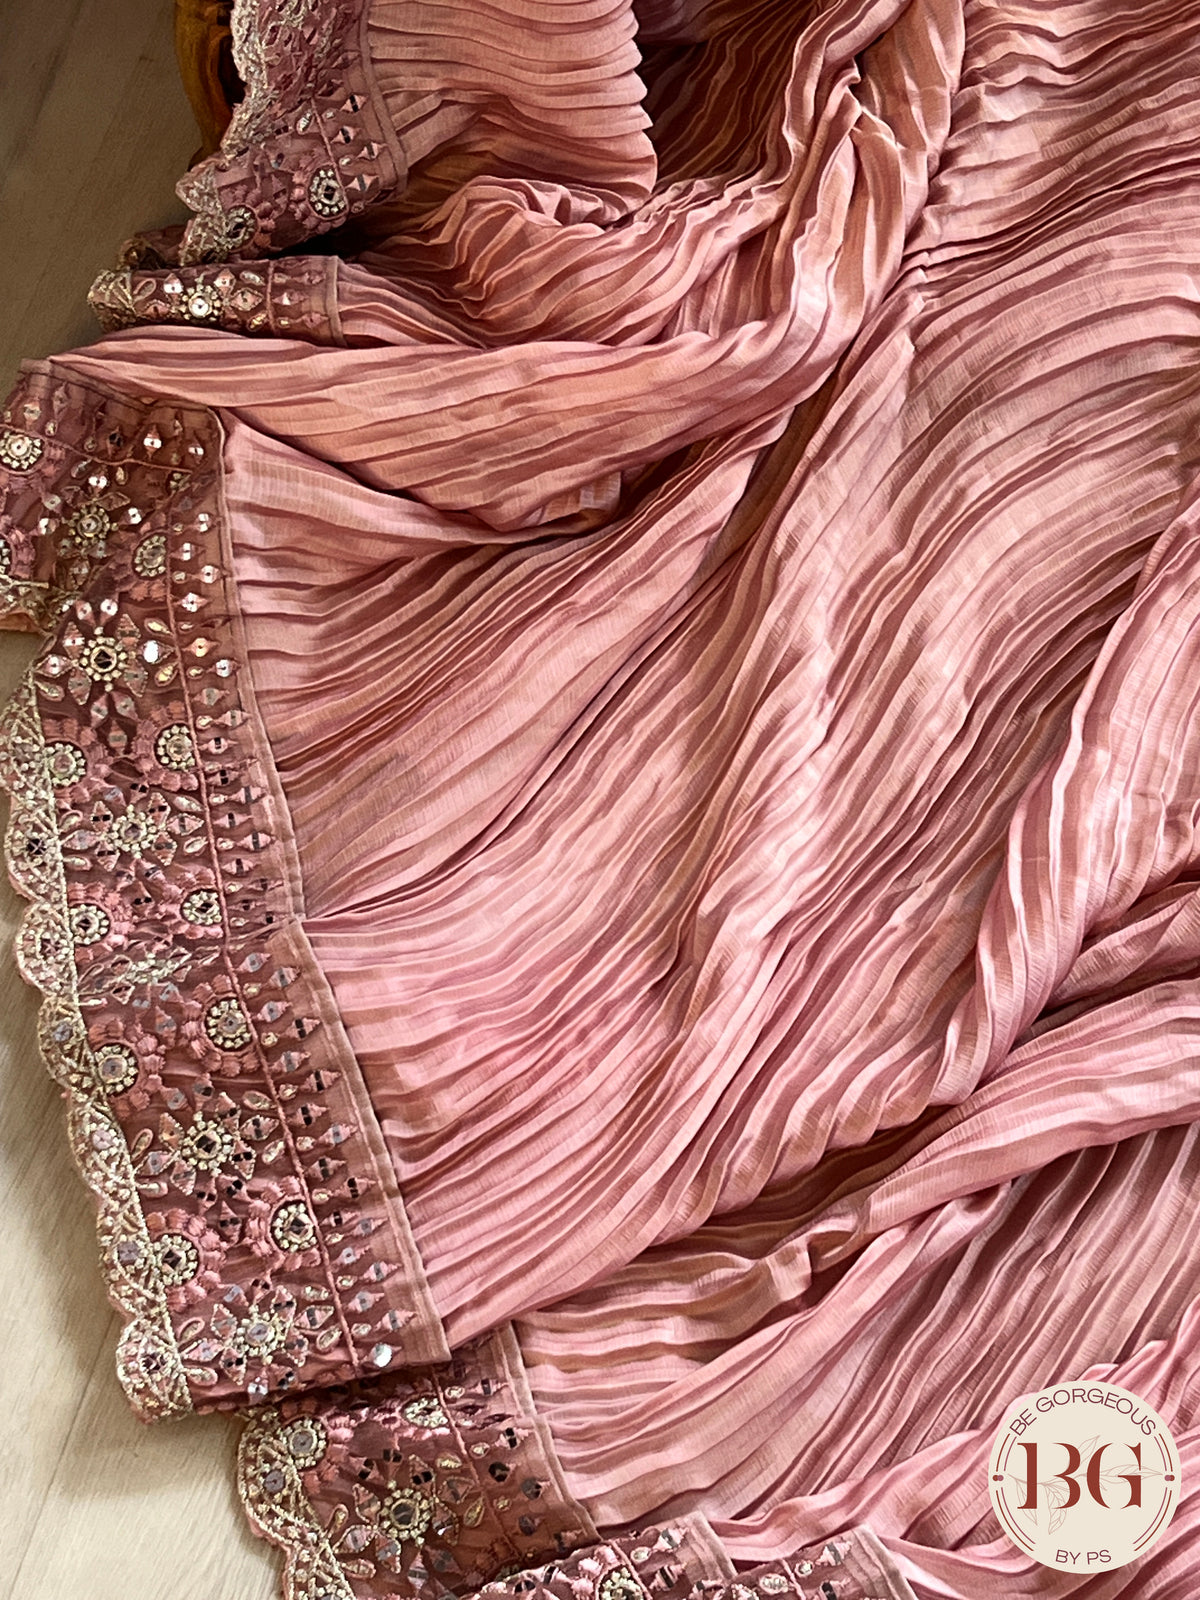 Pleated Ruffle saree with gorgeous lace borders saree color - pink